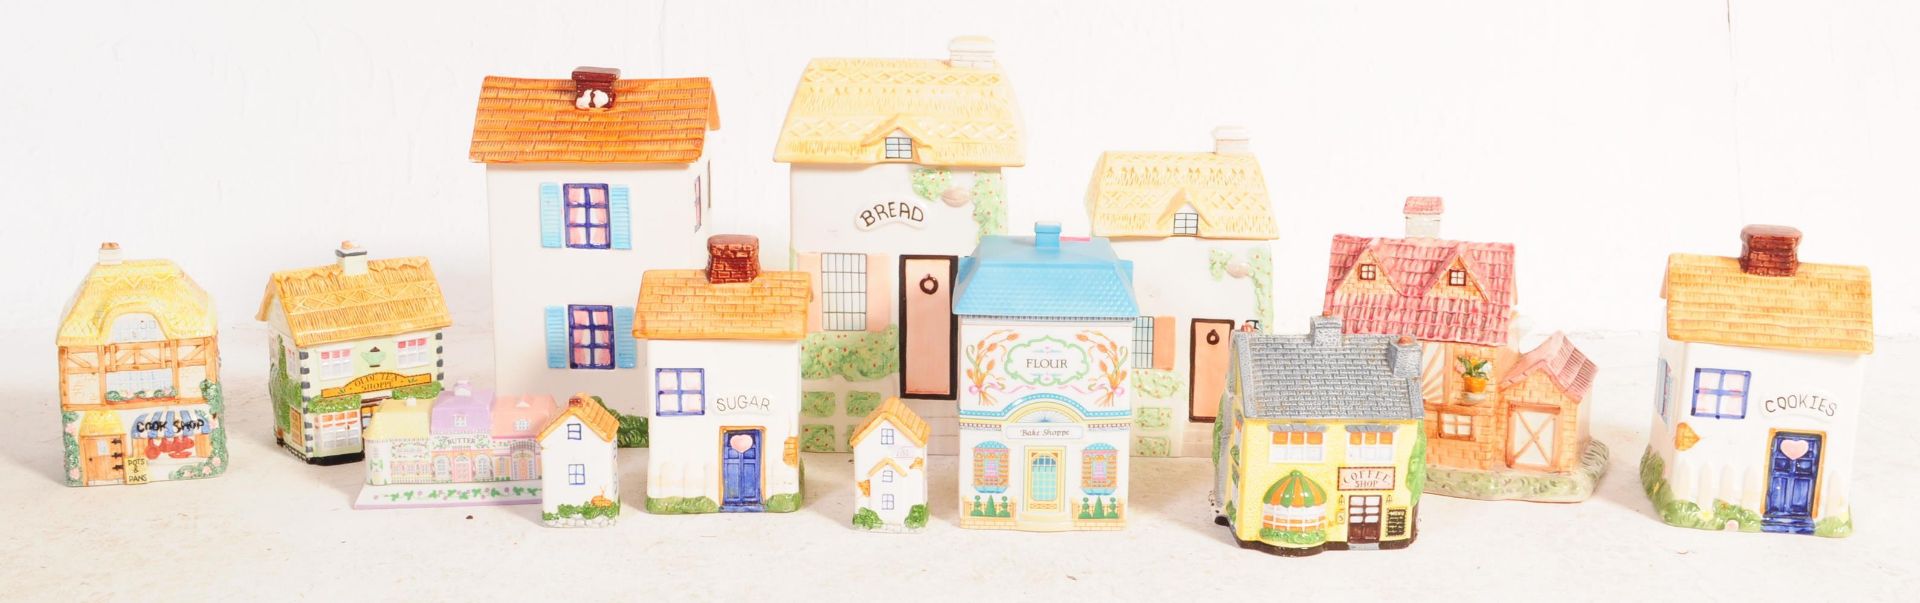 COLLECTION OF 20TH CENTURY COOKIE / BISCUIT JAR HOUSES